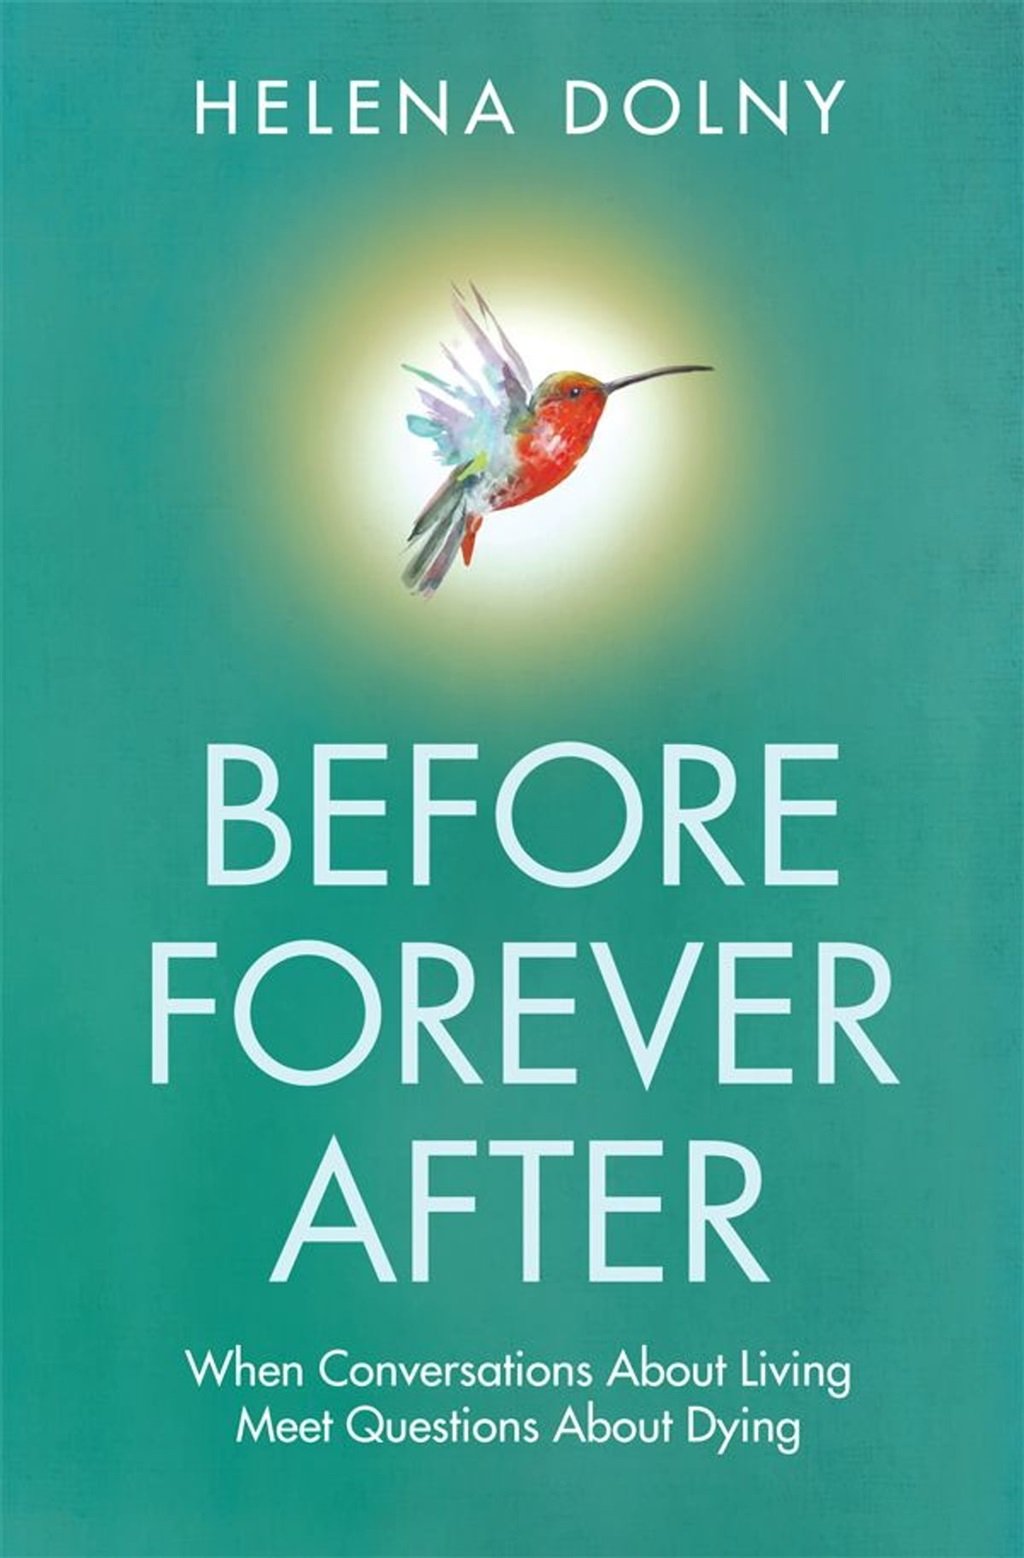 The cover of Before Forever After by Dr Helena Dol